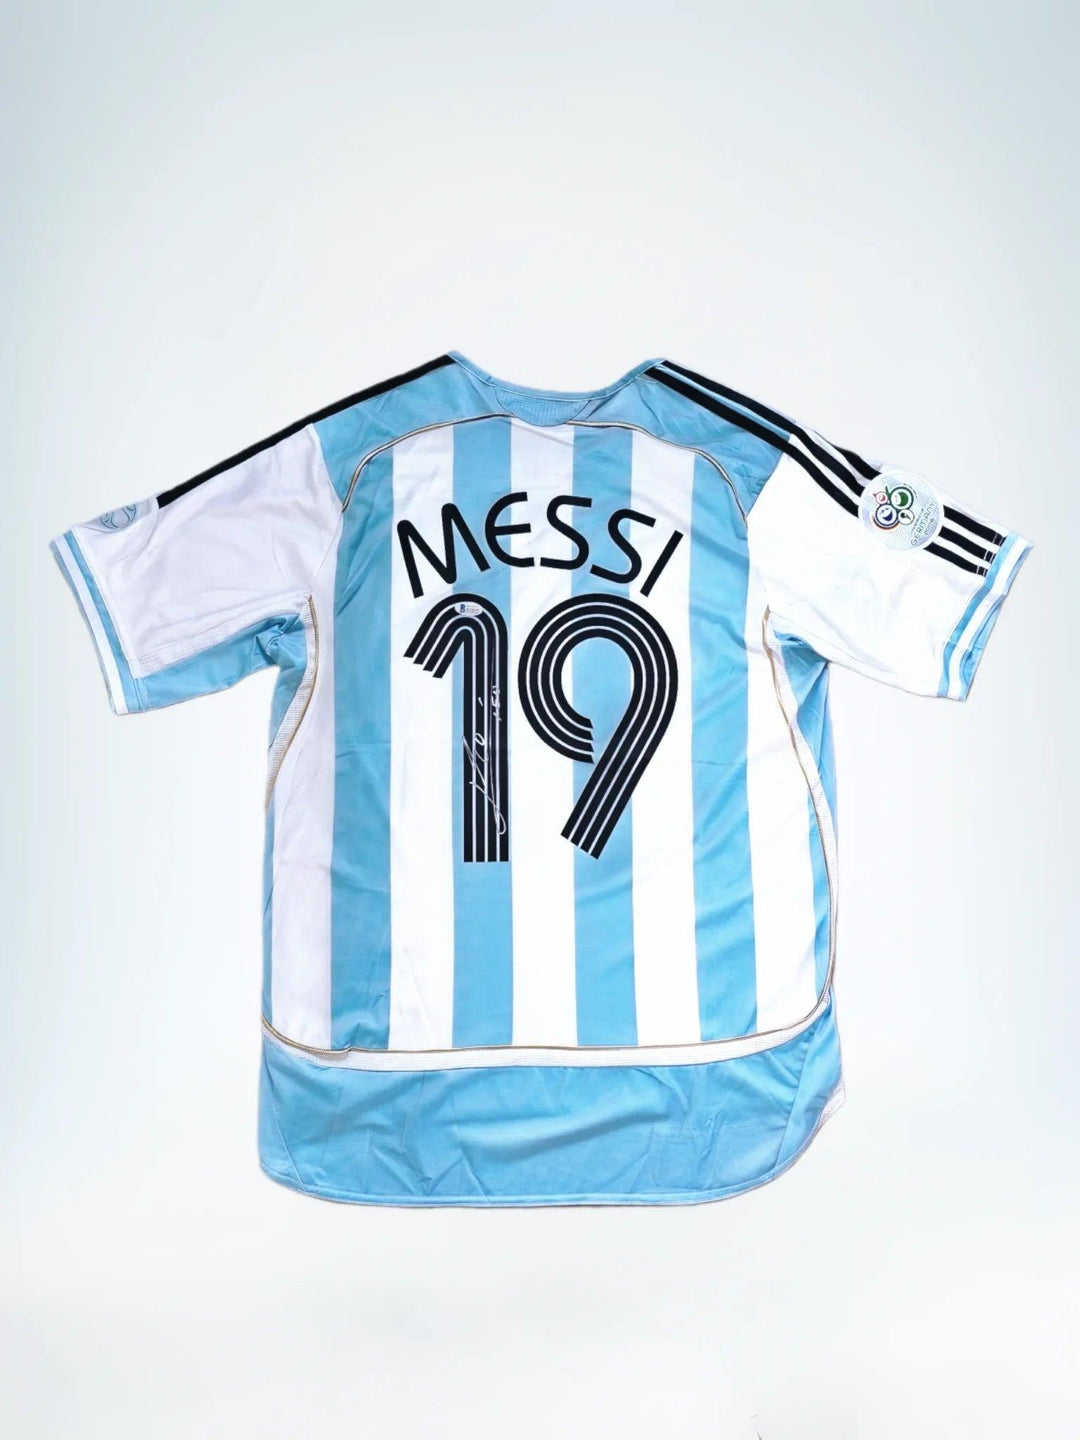 Messi 19 Argentina 2006 World Cup Jersey - Signed Debut | Beckett COA